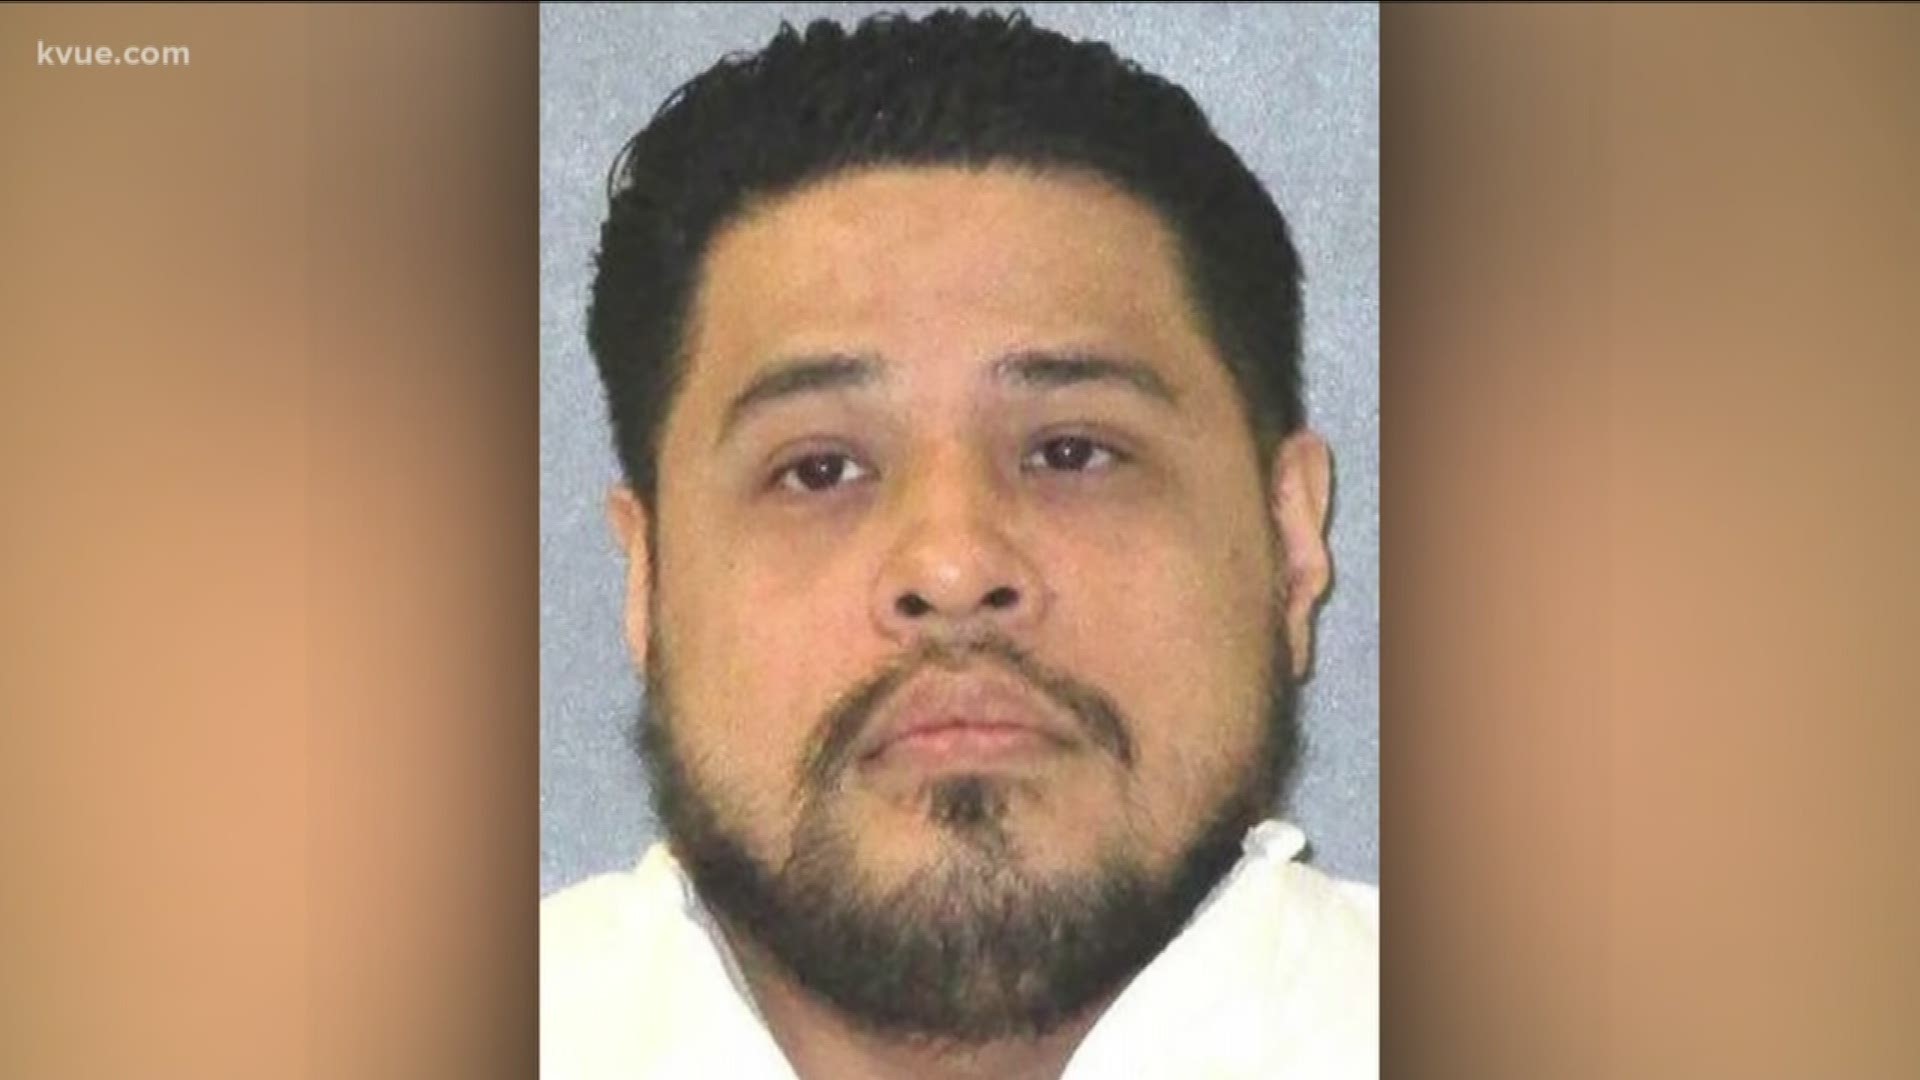 Texas is set to execute Mark Soliz for the murder of a 61-year-old North Texas woman.